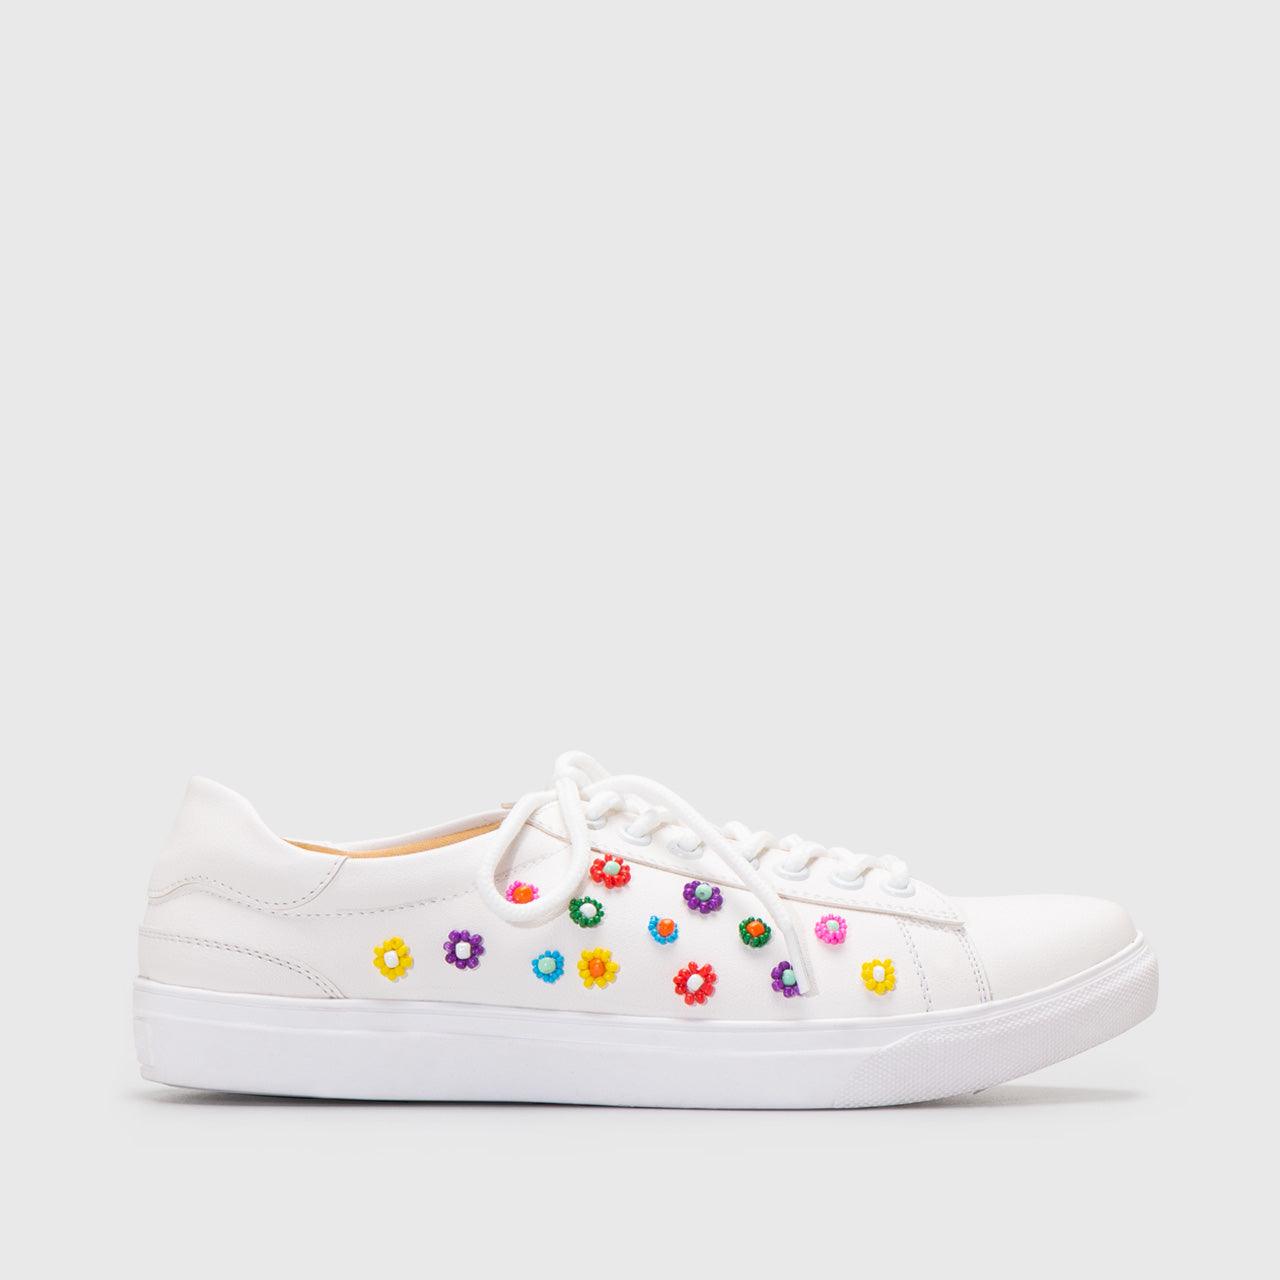 Adorable Projects-Dev Sneakers Milcah Sneakers Embellishment White